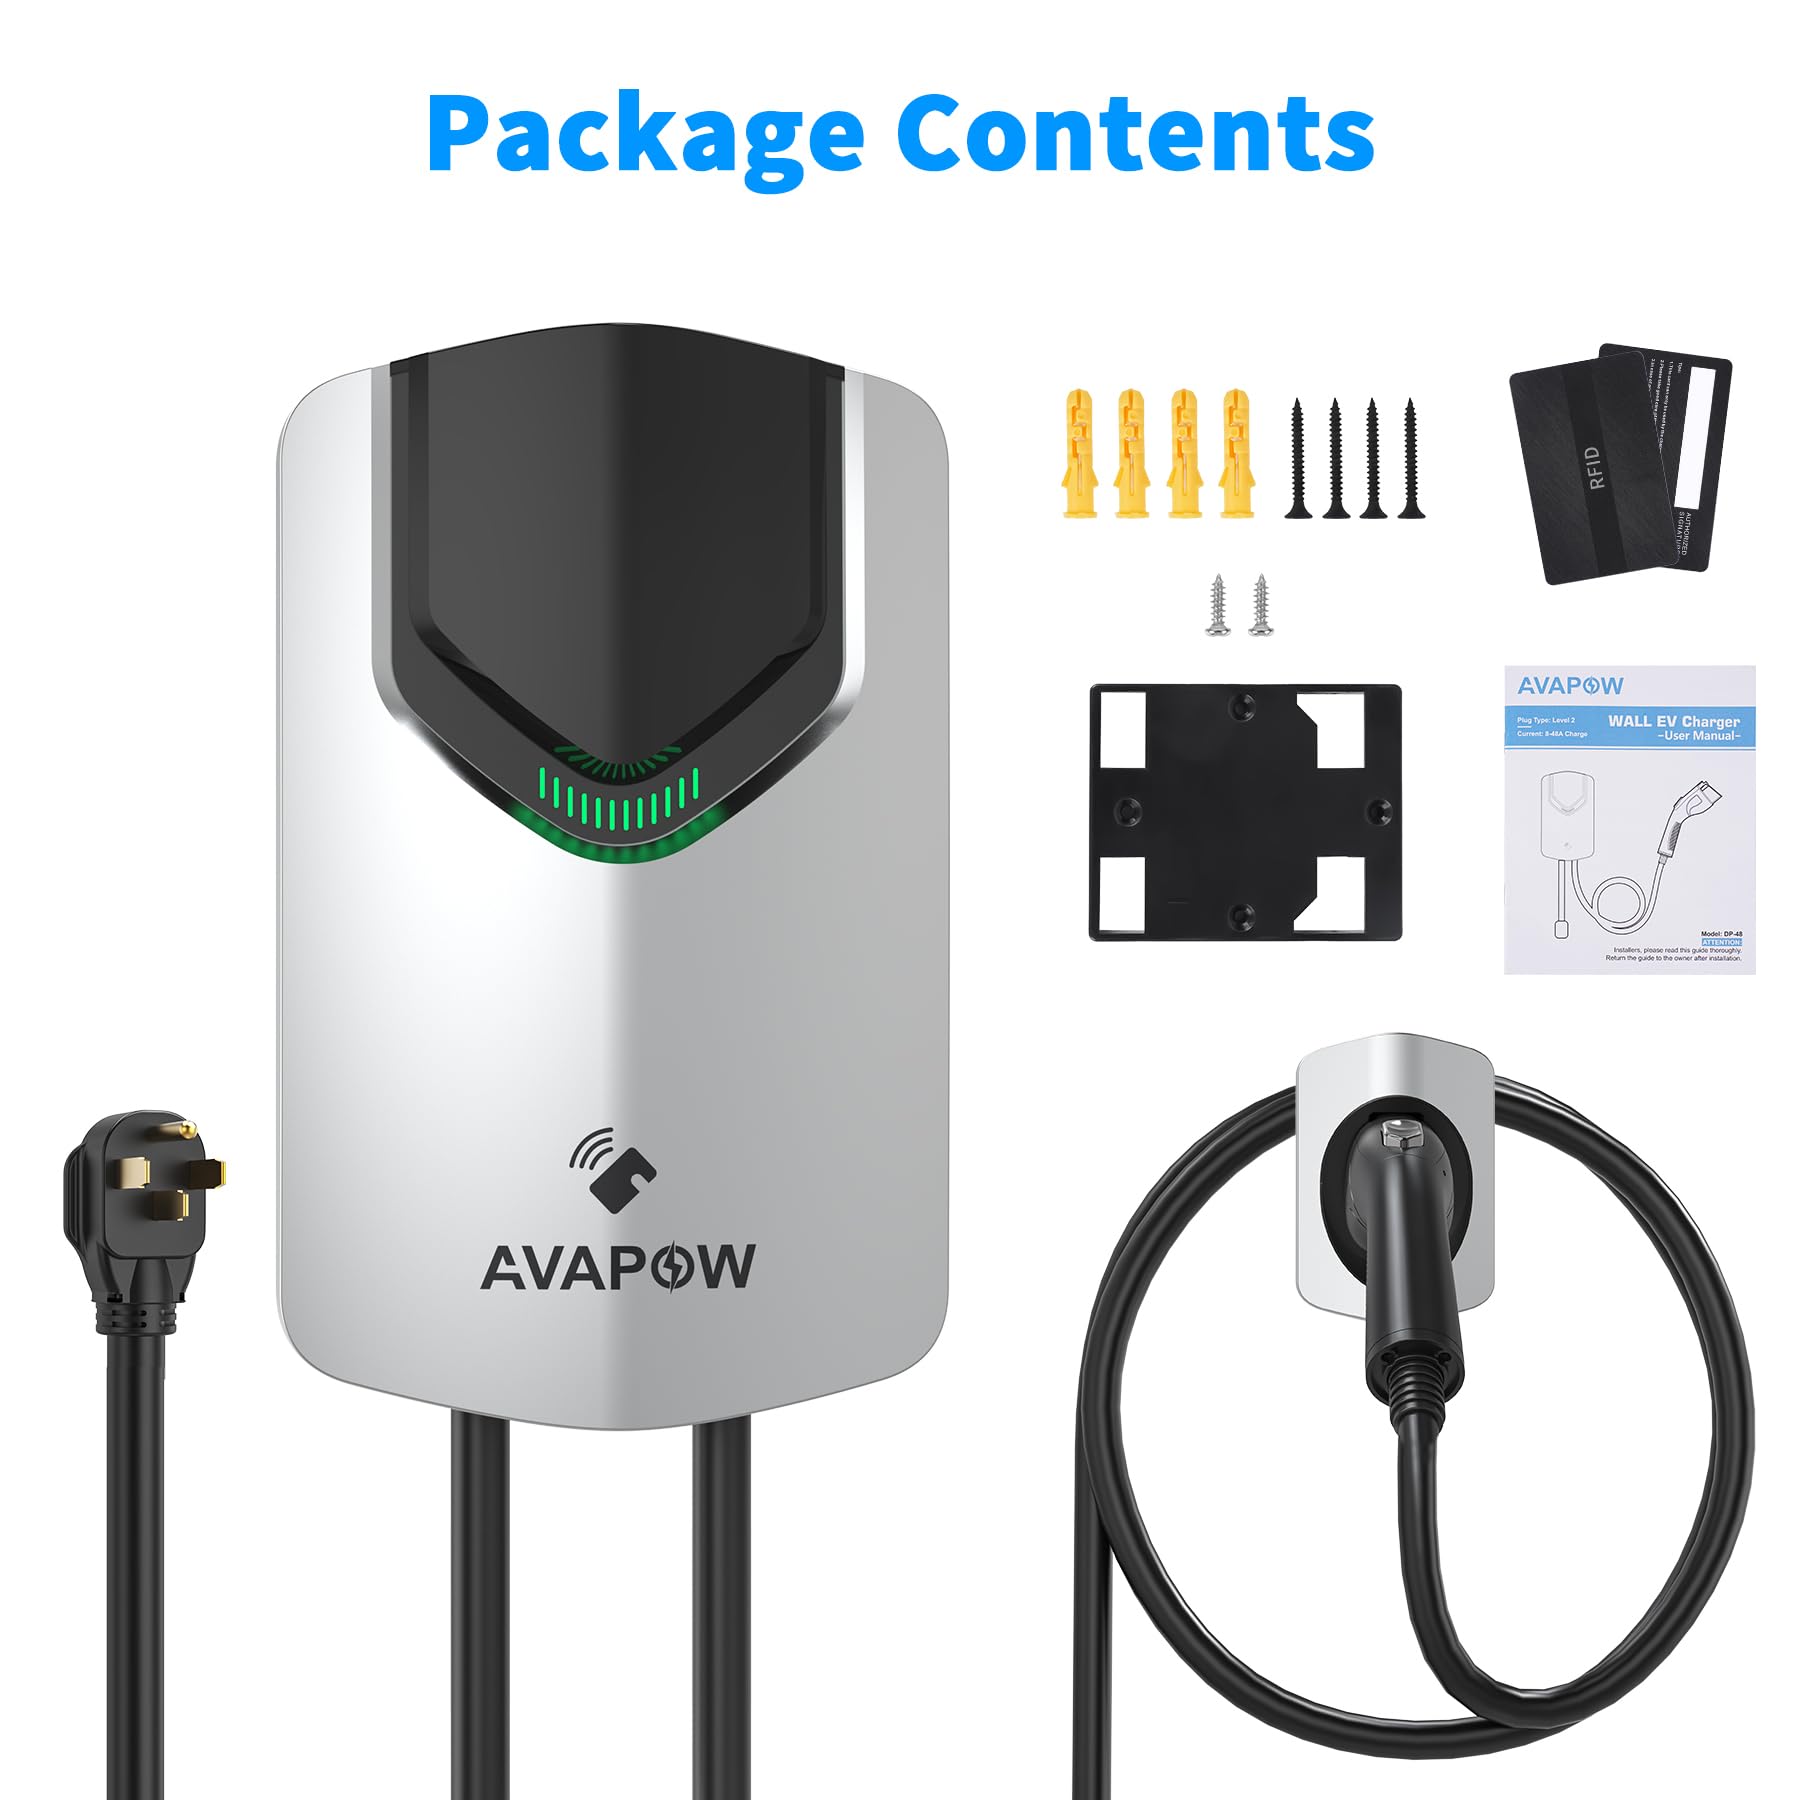 57% off: AVAPOW Level 2 EV Charger Up to 48A Current, 25FT Wall Electric Car Charger with App Control, RFID Unlocking, NEMA 14-50 Plug $149.99